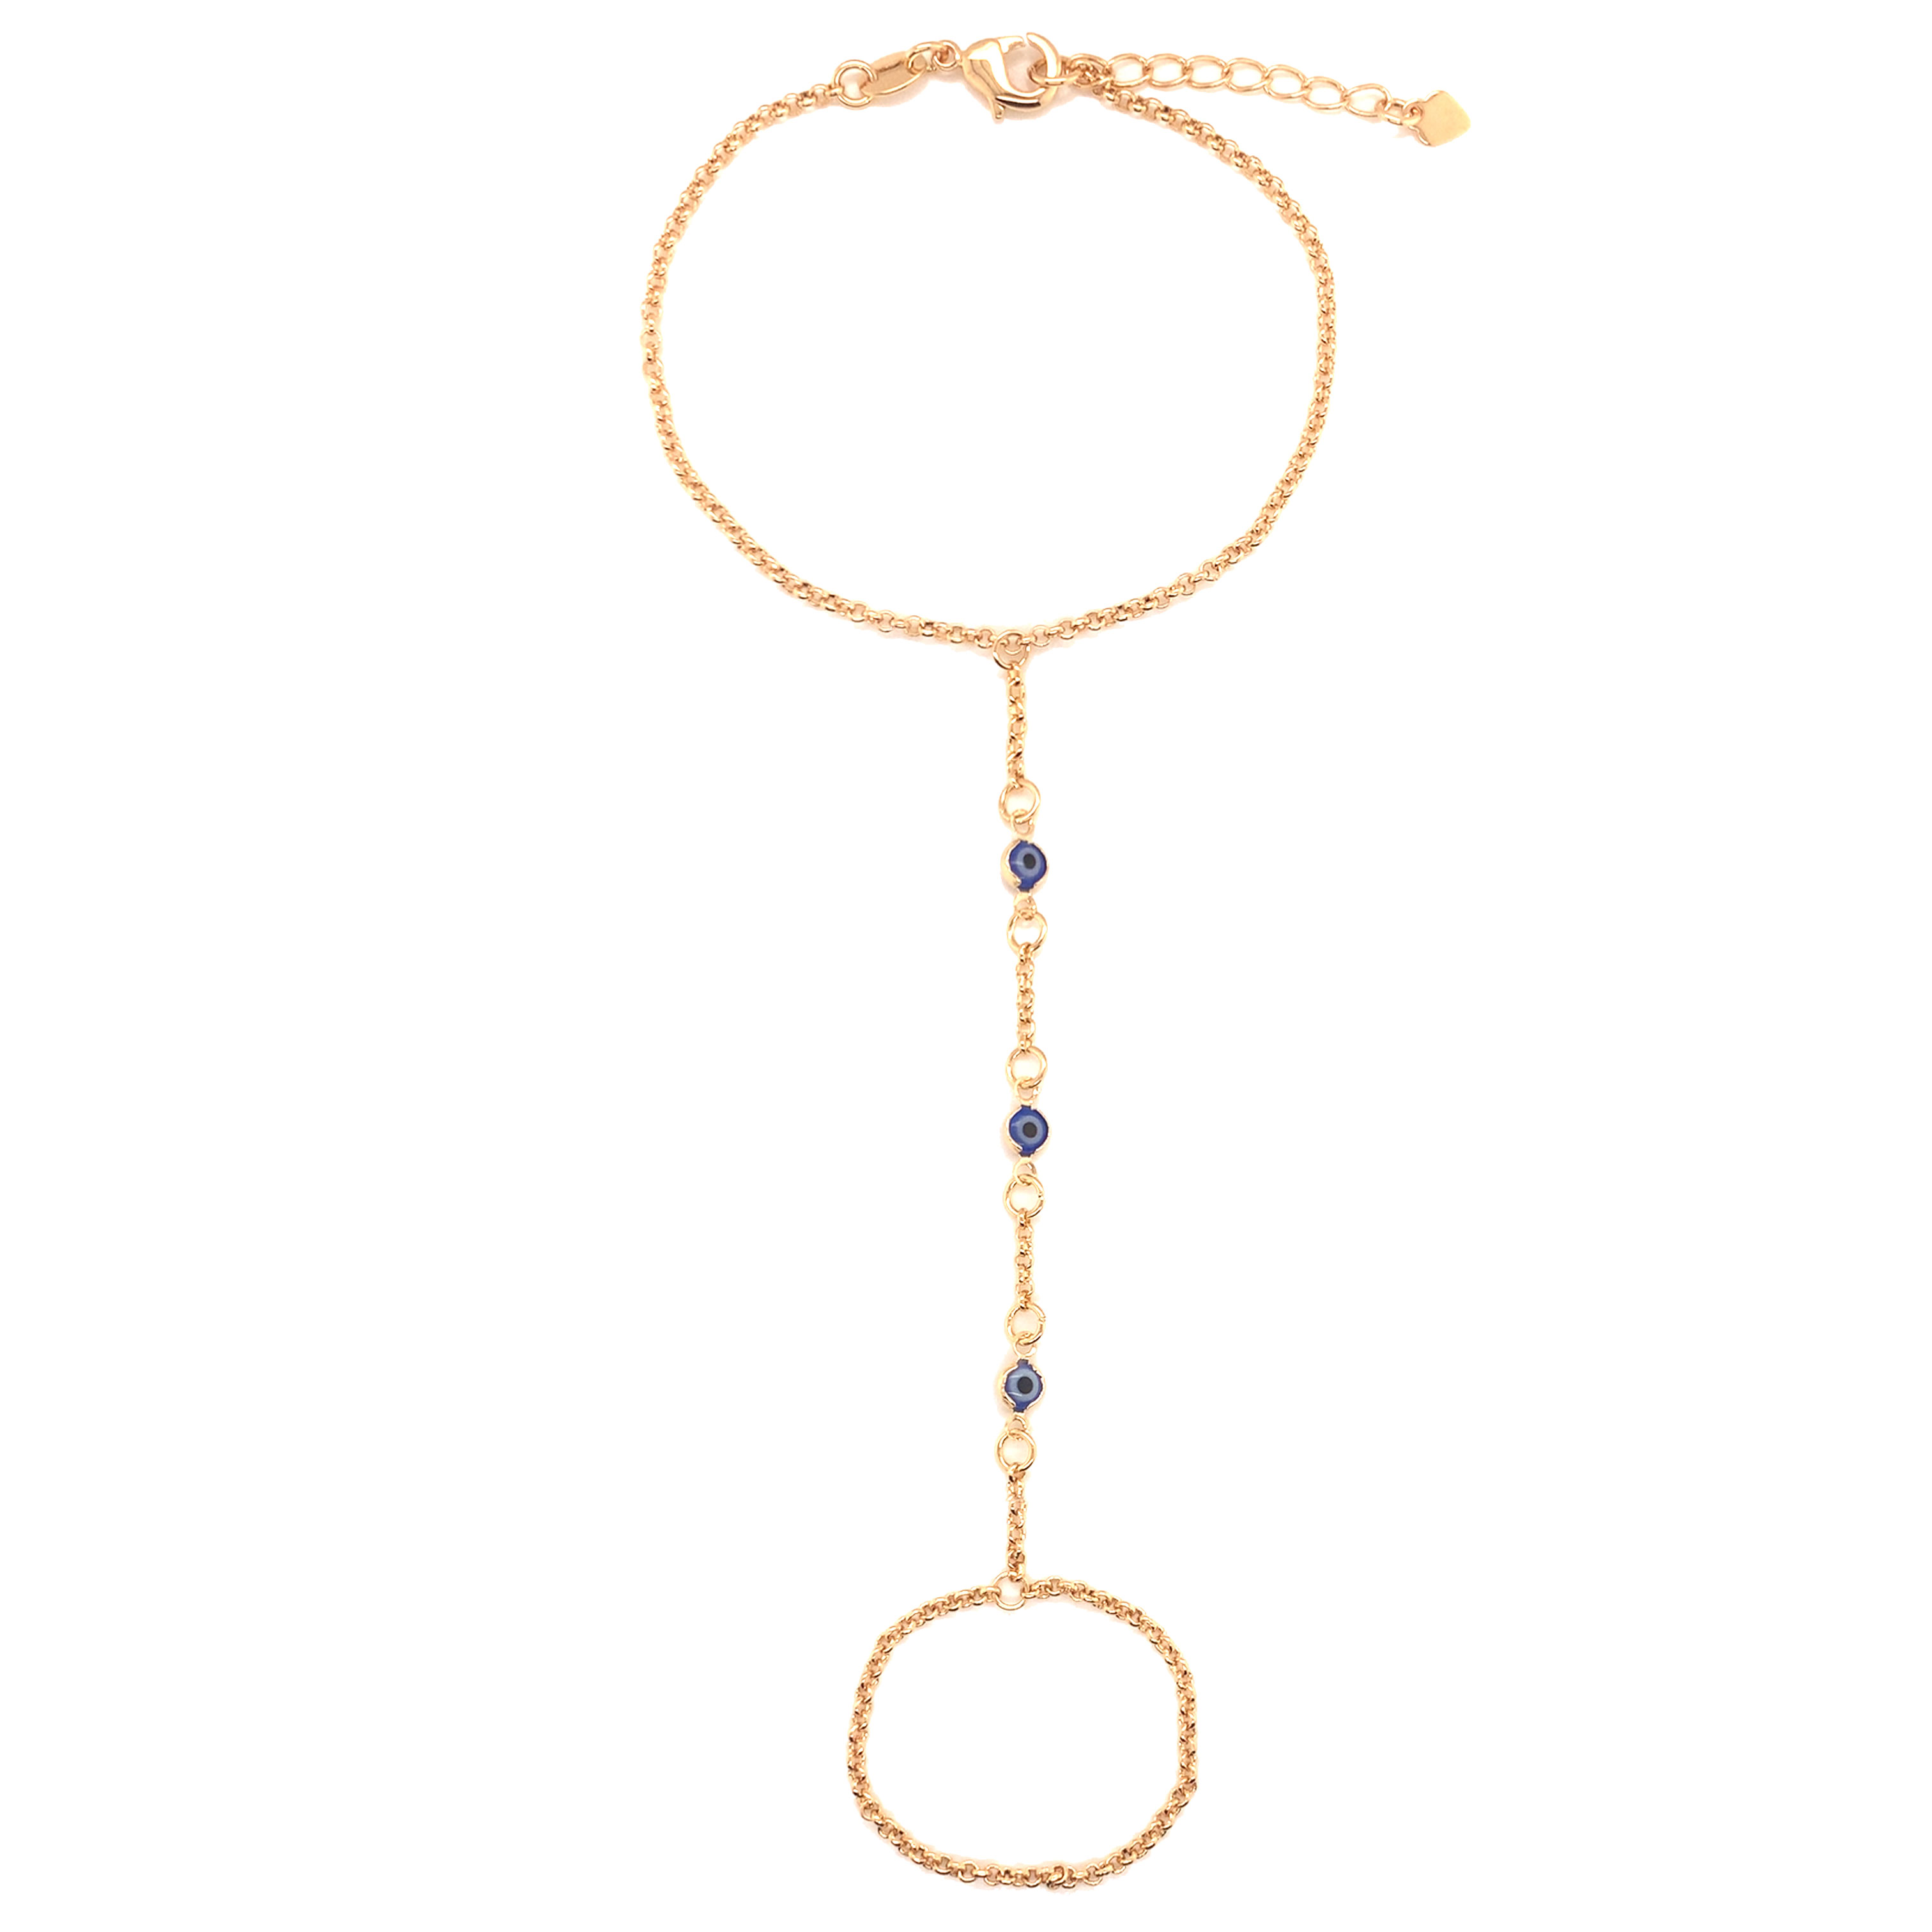 Evil Eye Hand Chain 7" + 1.5" Extension - Gold Filled